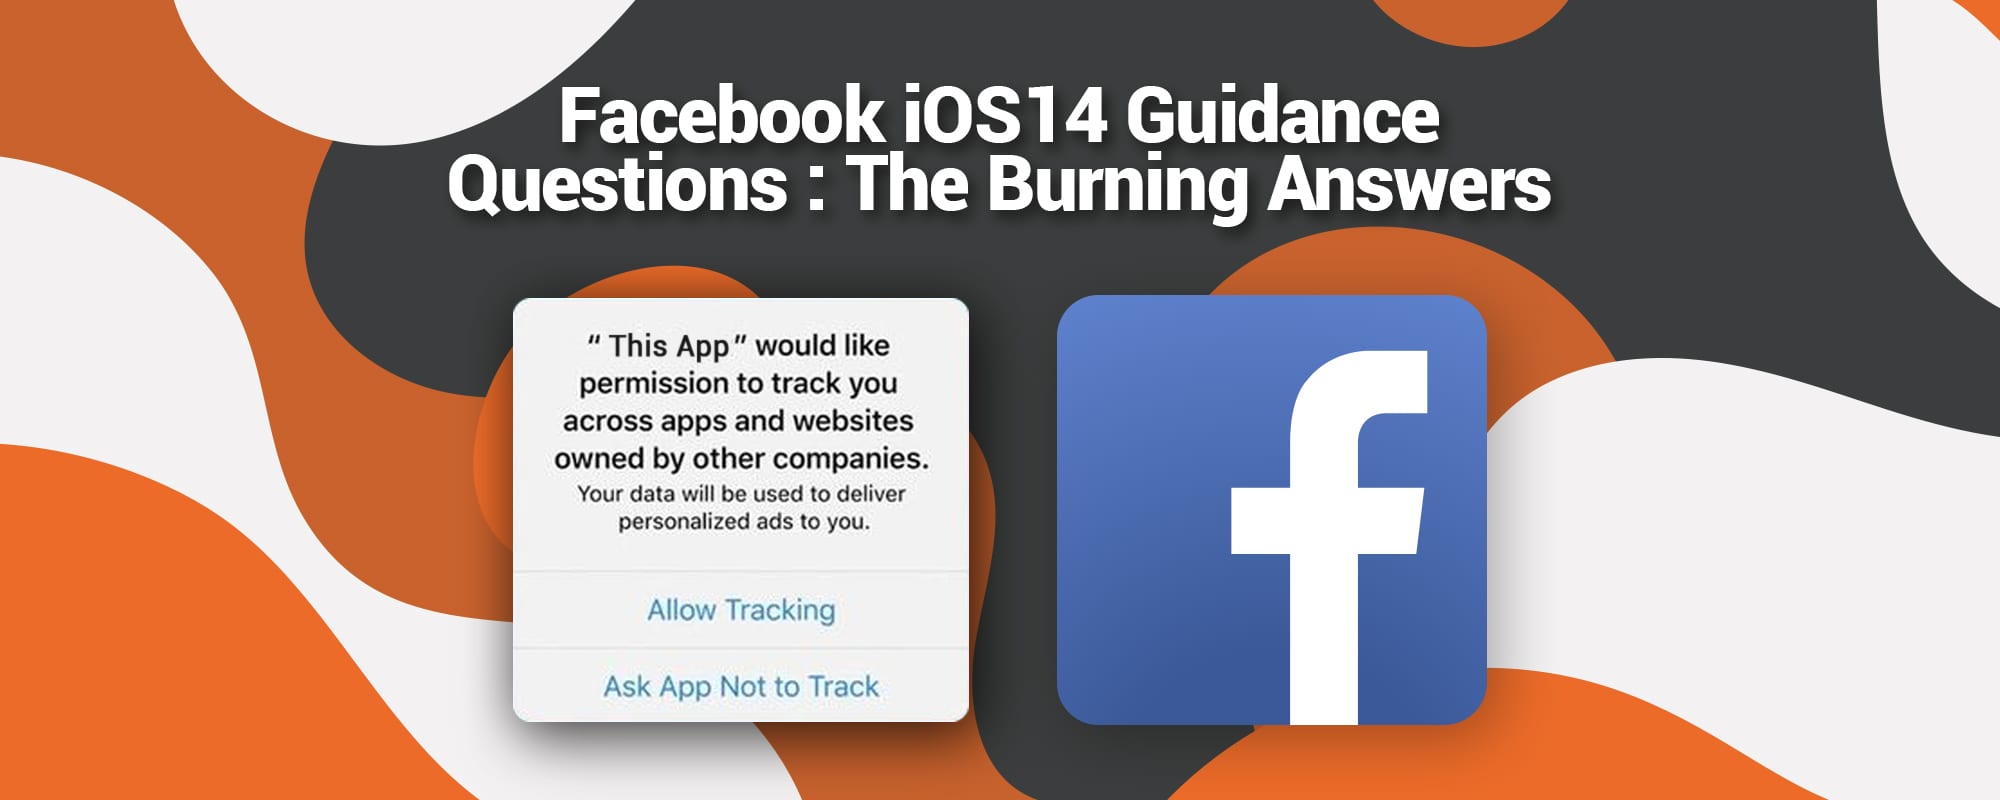 Facebook iOS14 Guidance Questions: The Burning Answers